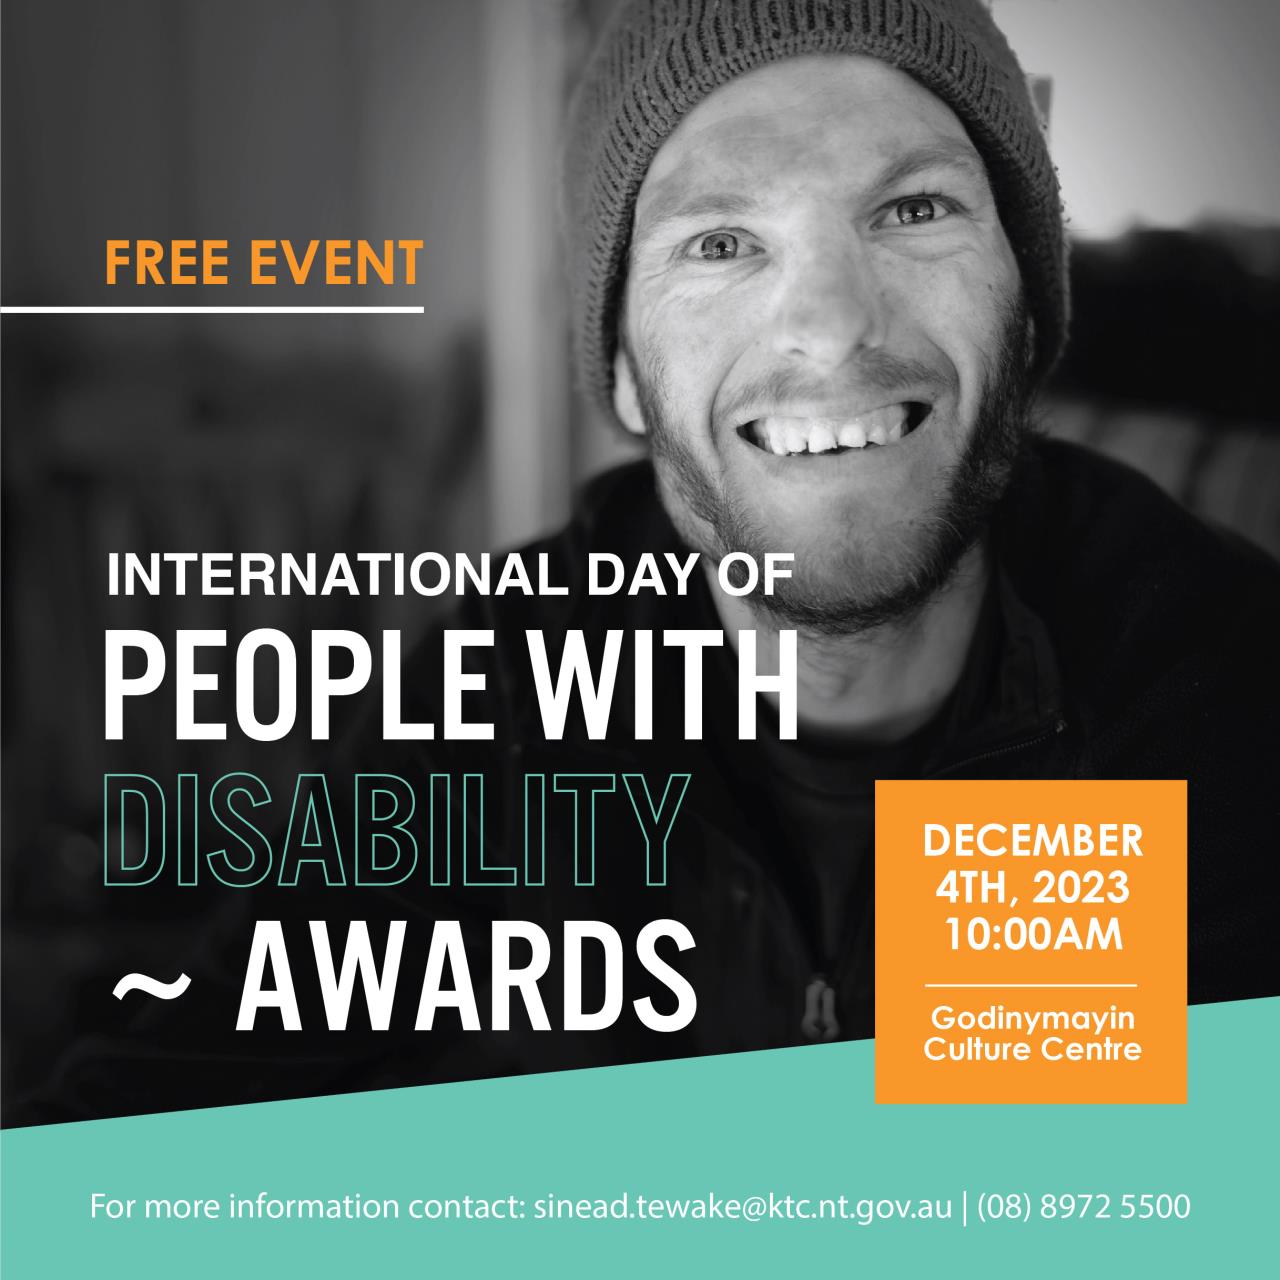 Media Release - International Day of People with Disability Awards